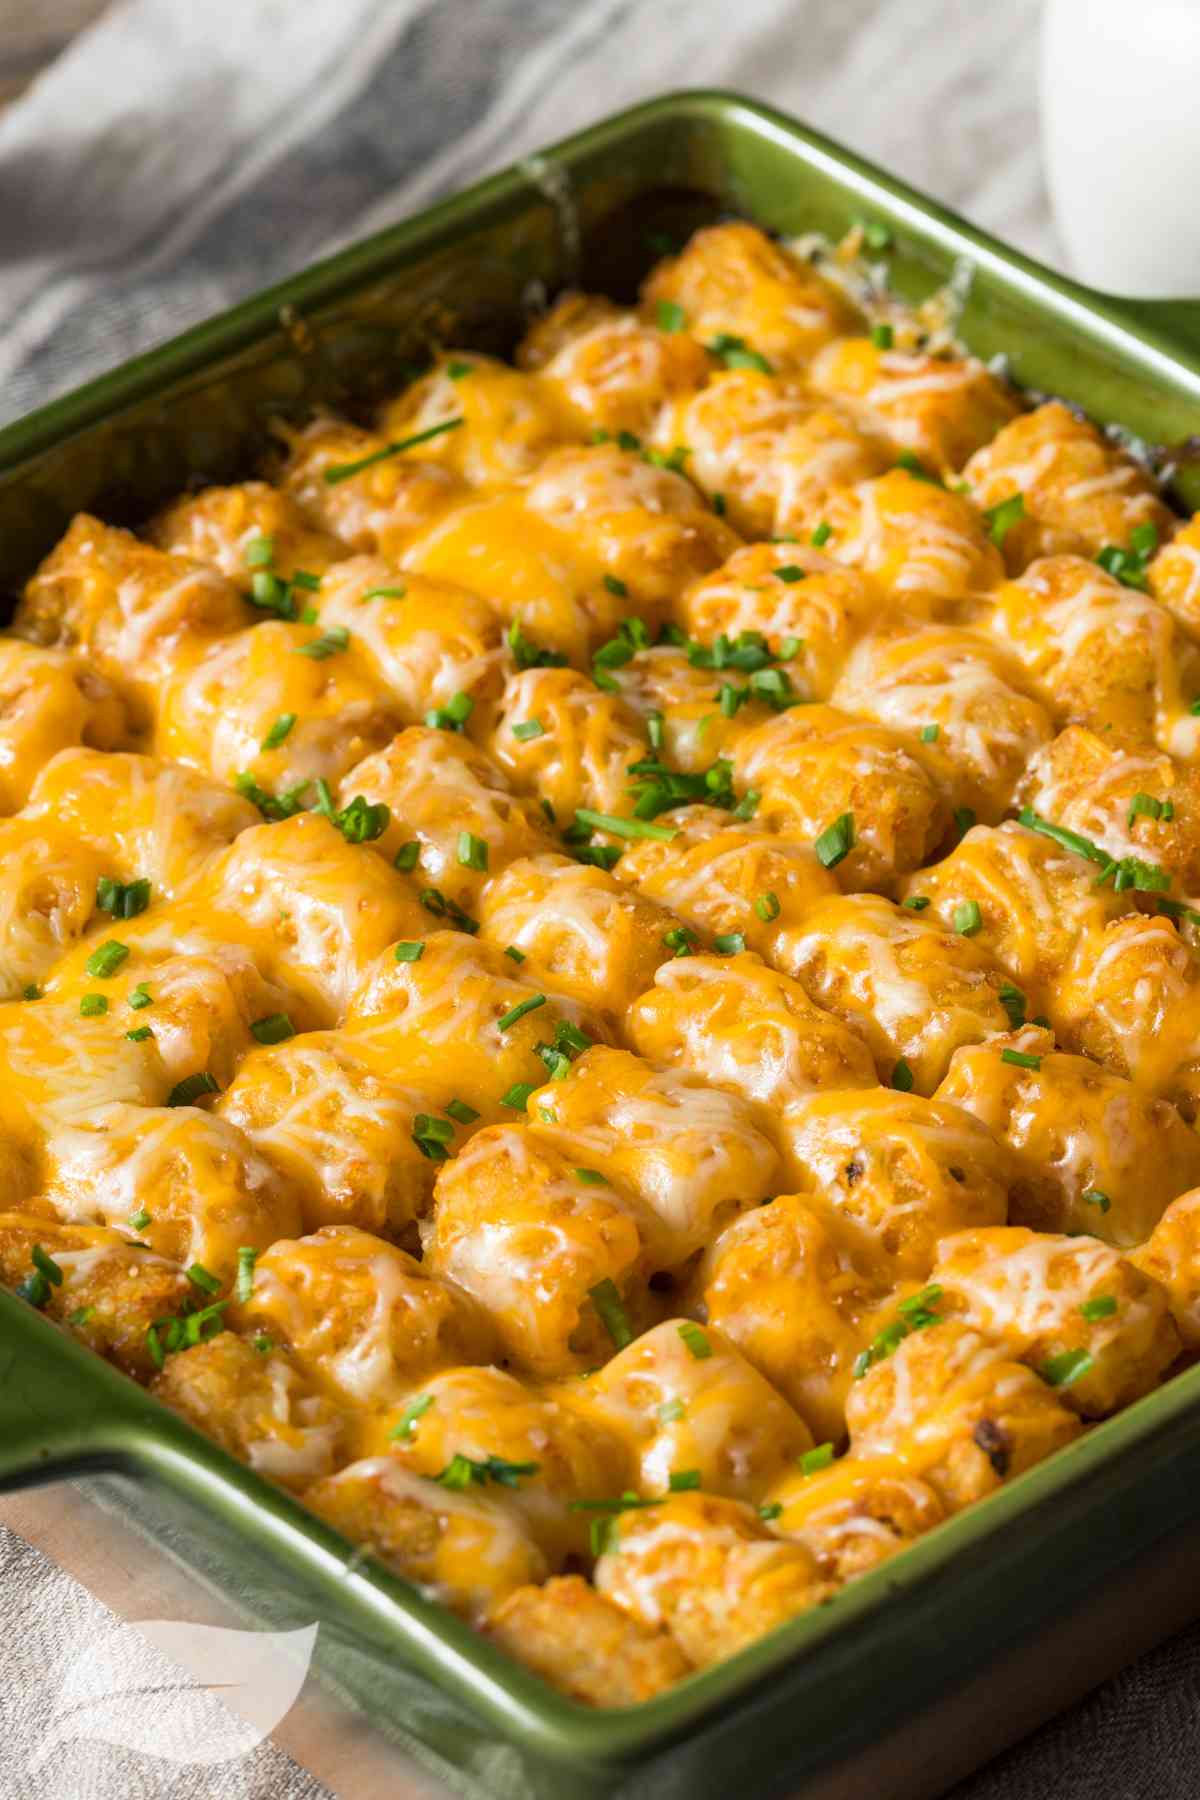 Ground beef tater tot casserole recipes